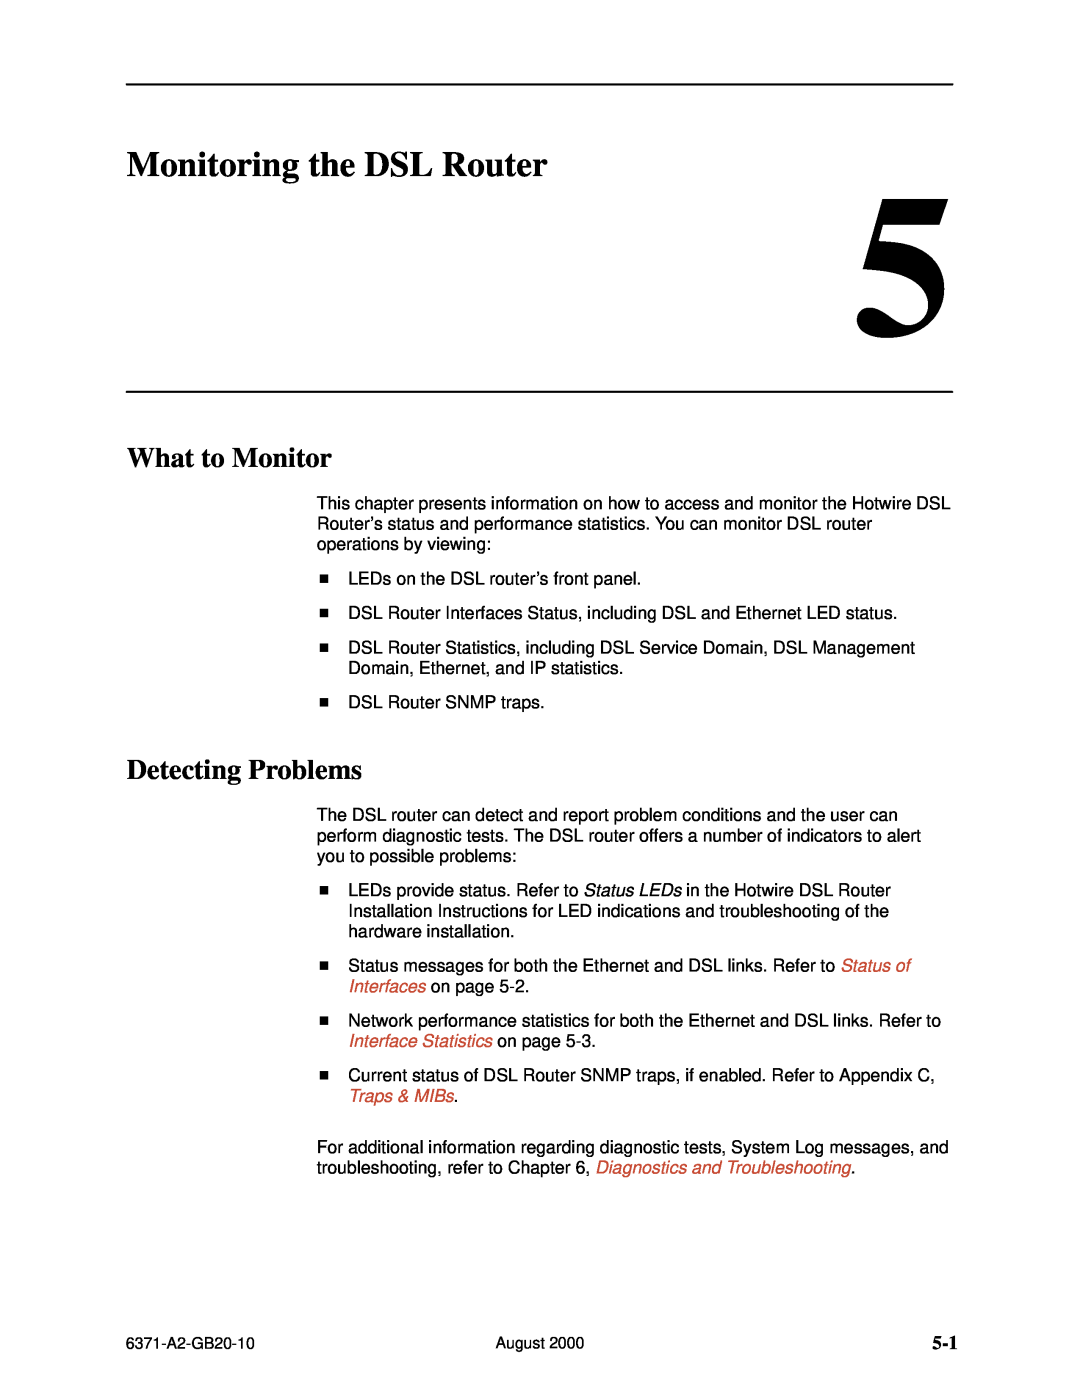 Paradyne Routers manual Monitoring the DSL Router, What to Monitor, Detecting Problems 